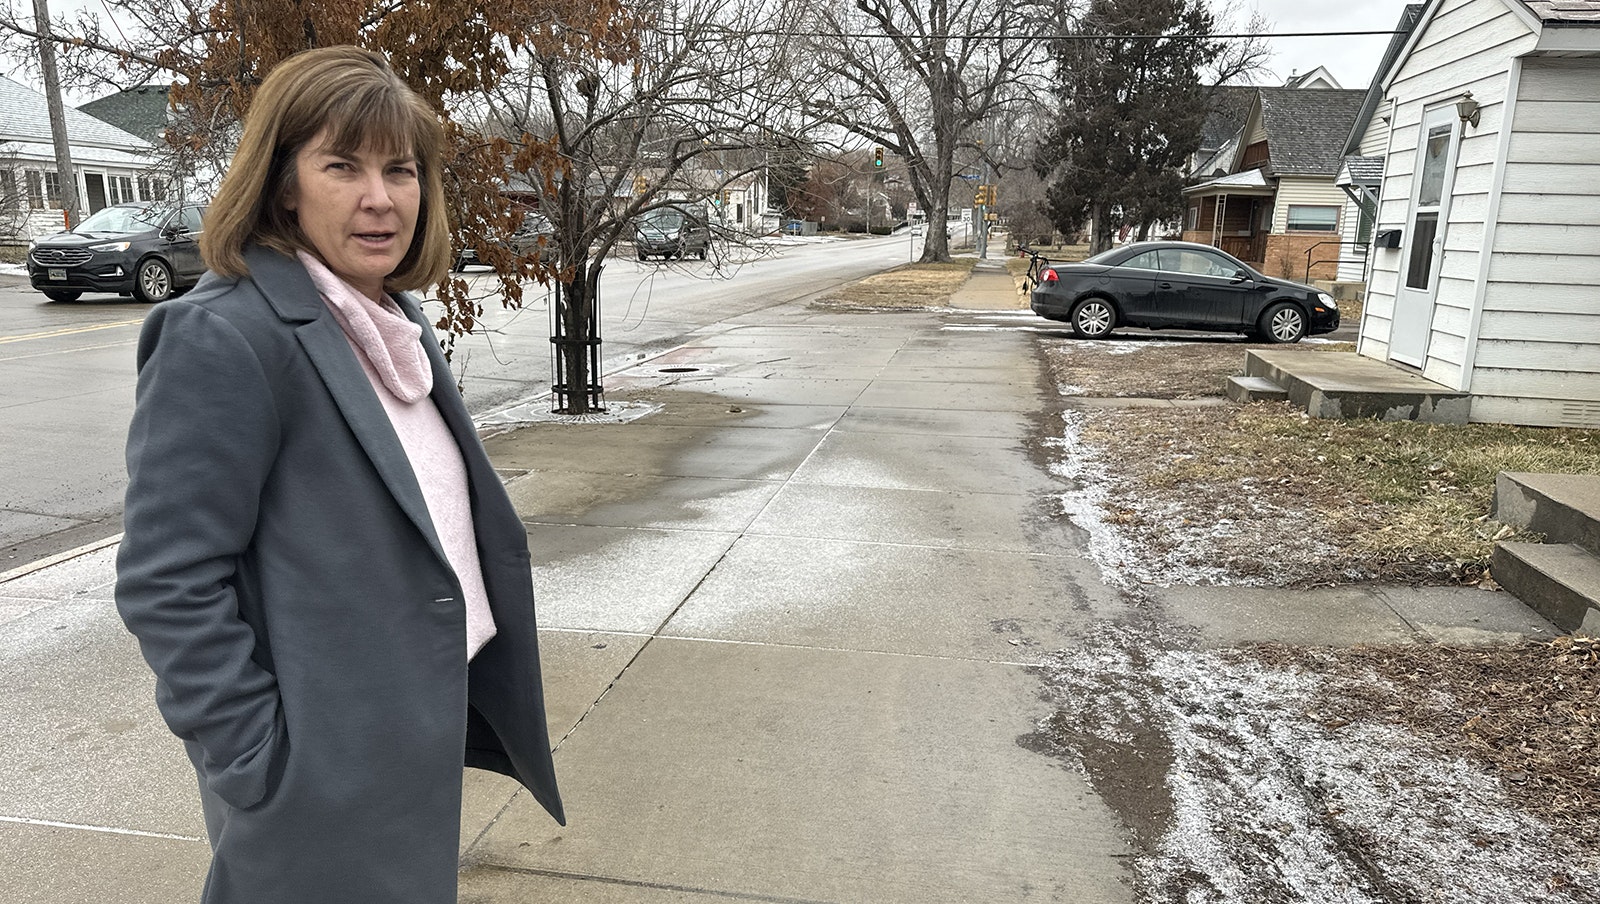 Lisa Mueller is a real estate agent with MC2 Collaborative in Sheridan less than a block from 58 5th St. where Sgt. Nevada Krinkee was killed. She said she heard first one, then four more gunshots, and saw police chase as suspect east.